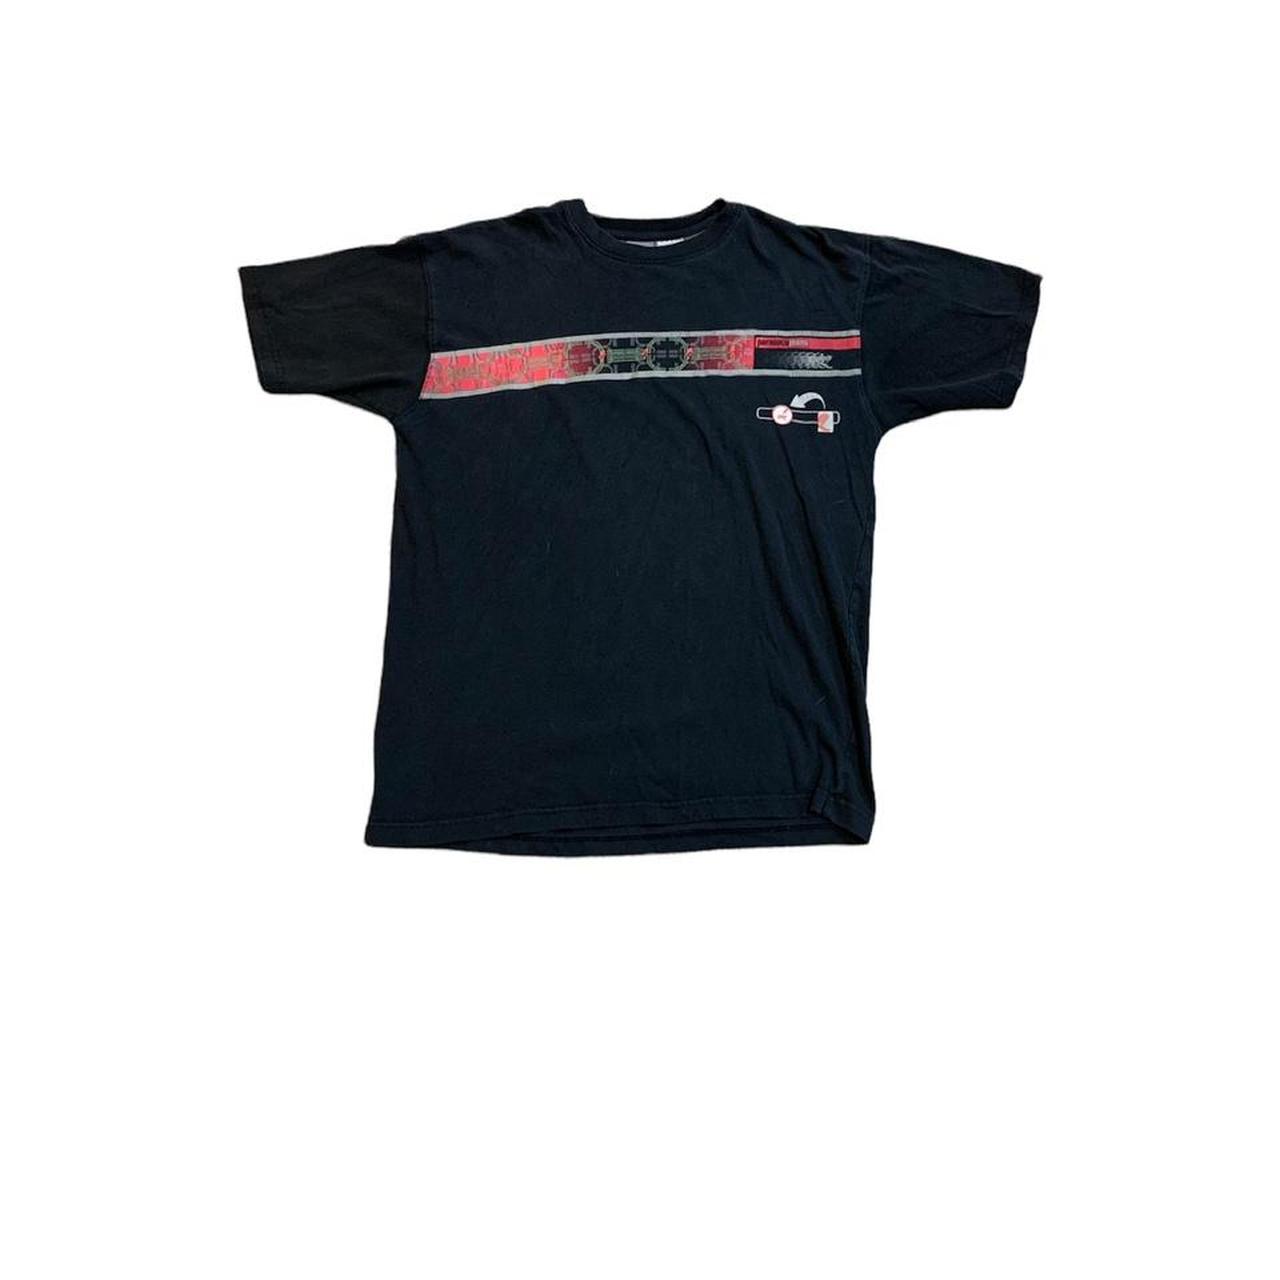 Parasuco Men's Black and Red T-shirt